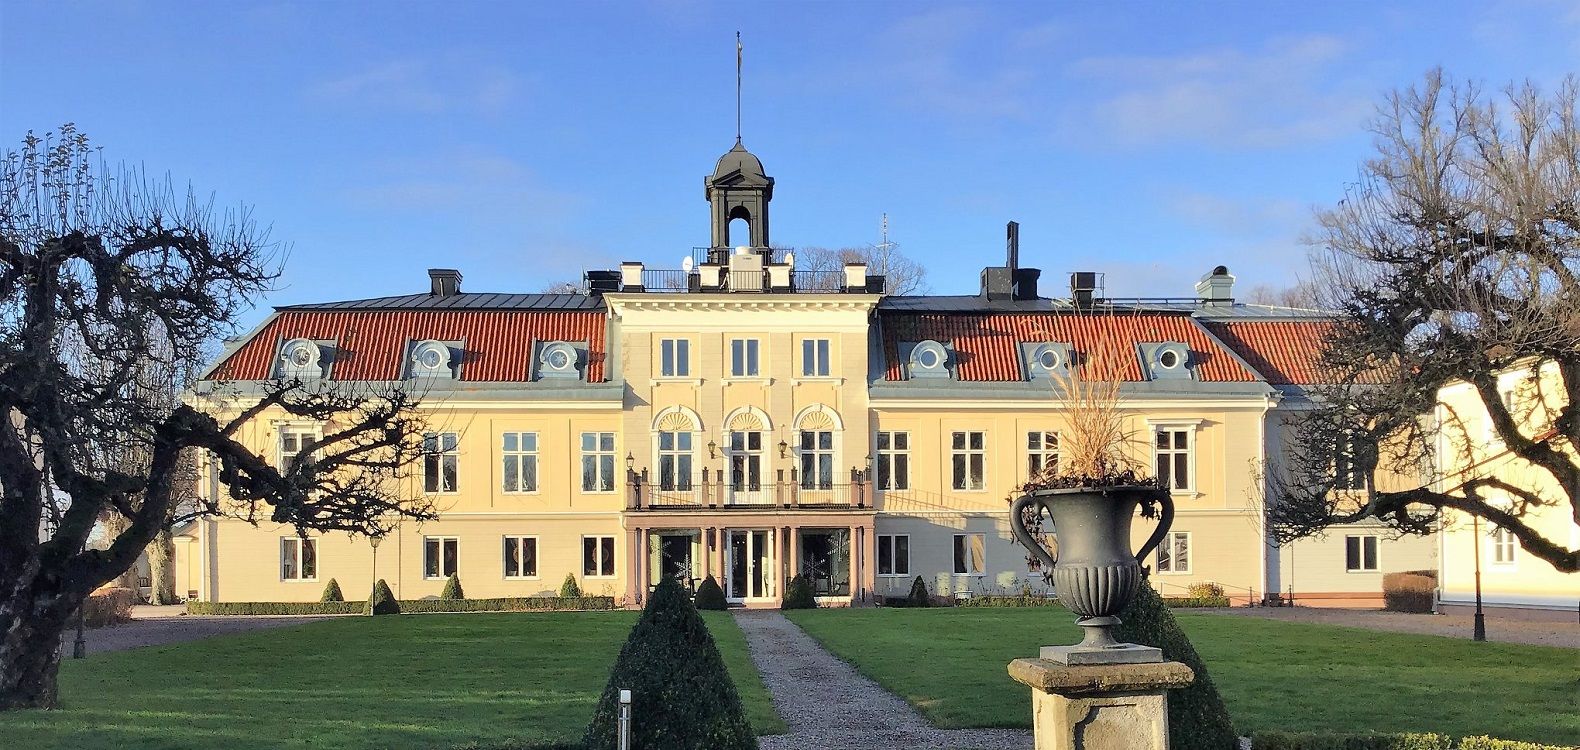 Royal treatment: Consider renting these luxurious European castles